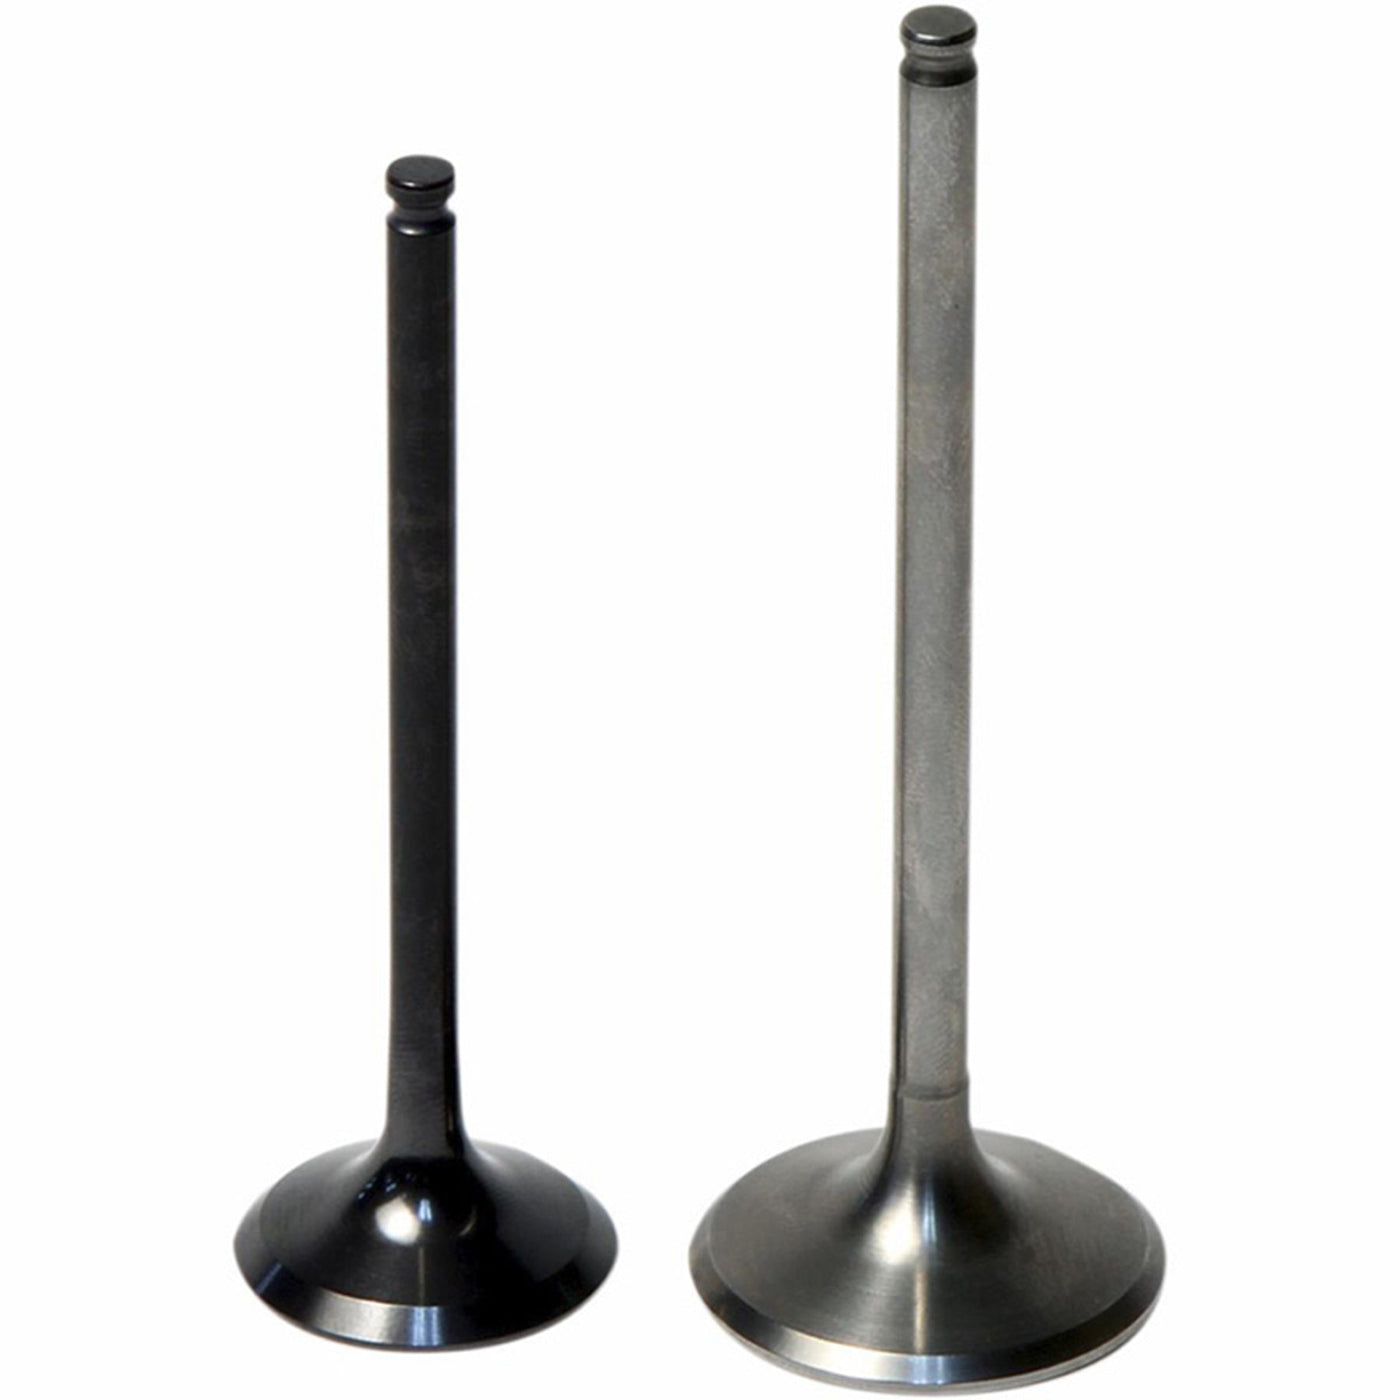 Hotcams 8400038-1 Intake and Exhaust Valves #8400038-1